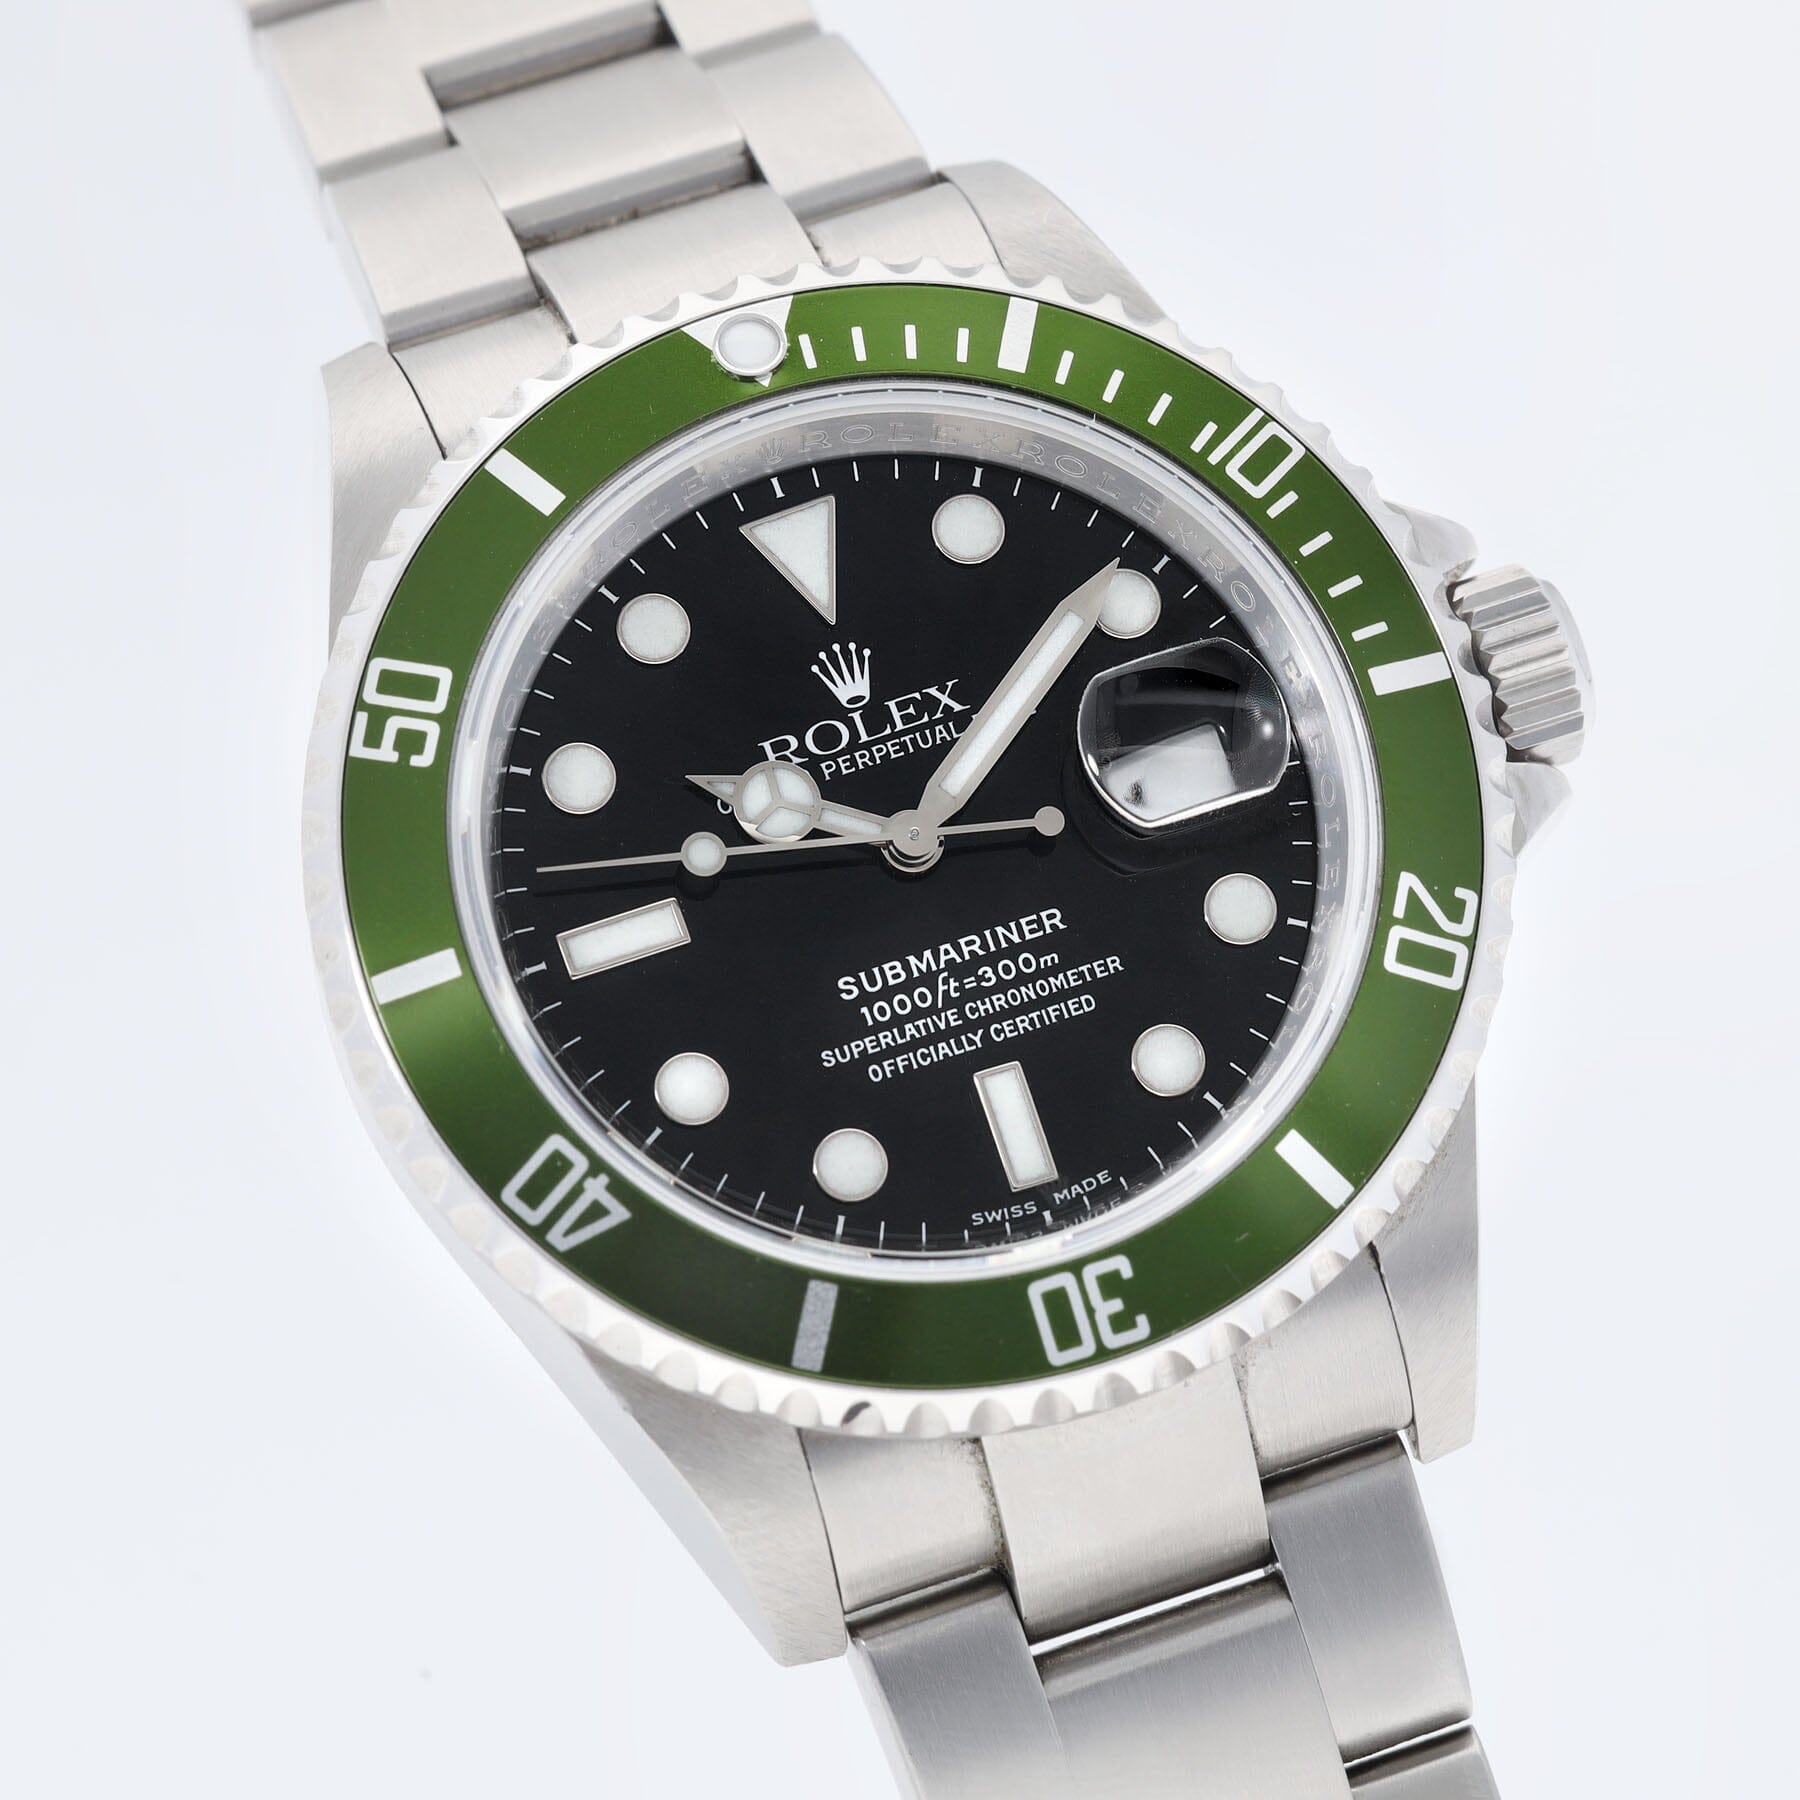 Rolex Submariner Date 16610LV 50th Anniversary Green Bezel with Papers